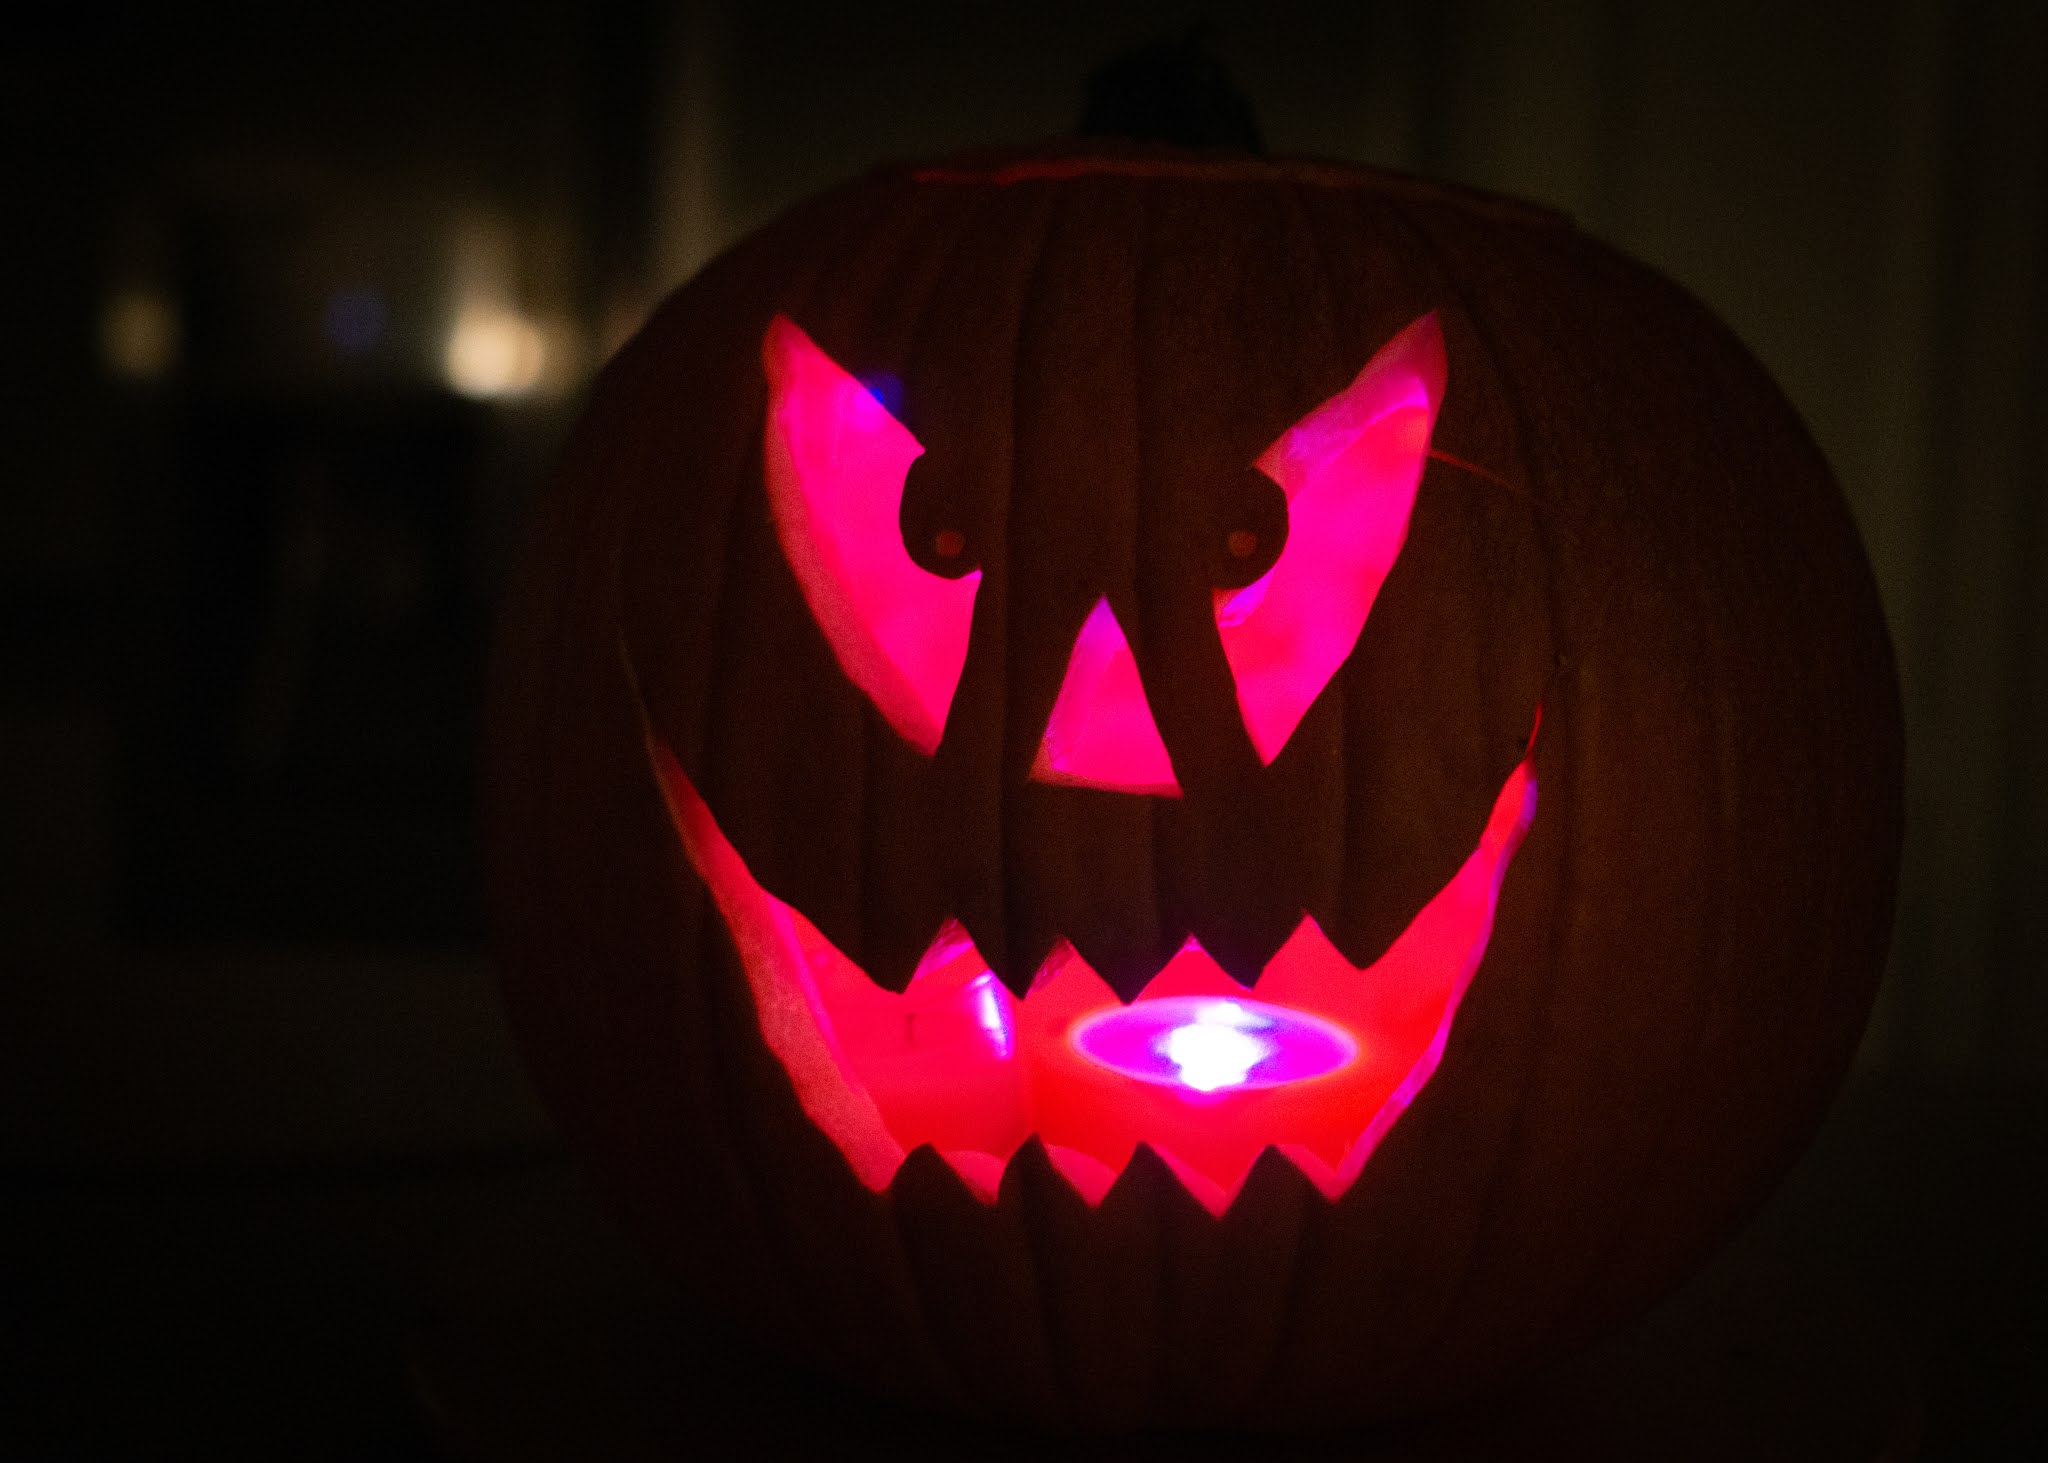 Scary pumpkin carving ideas